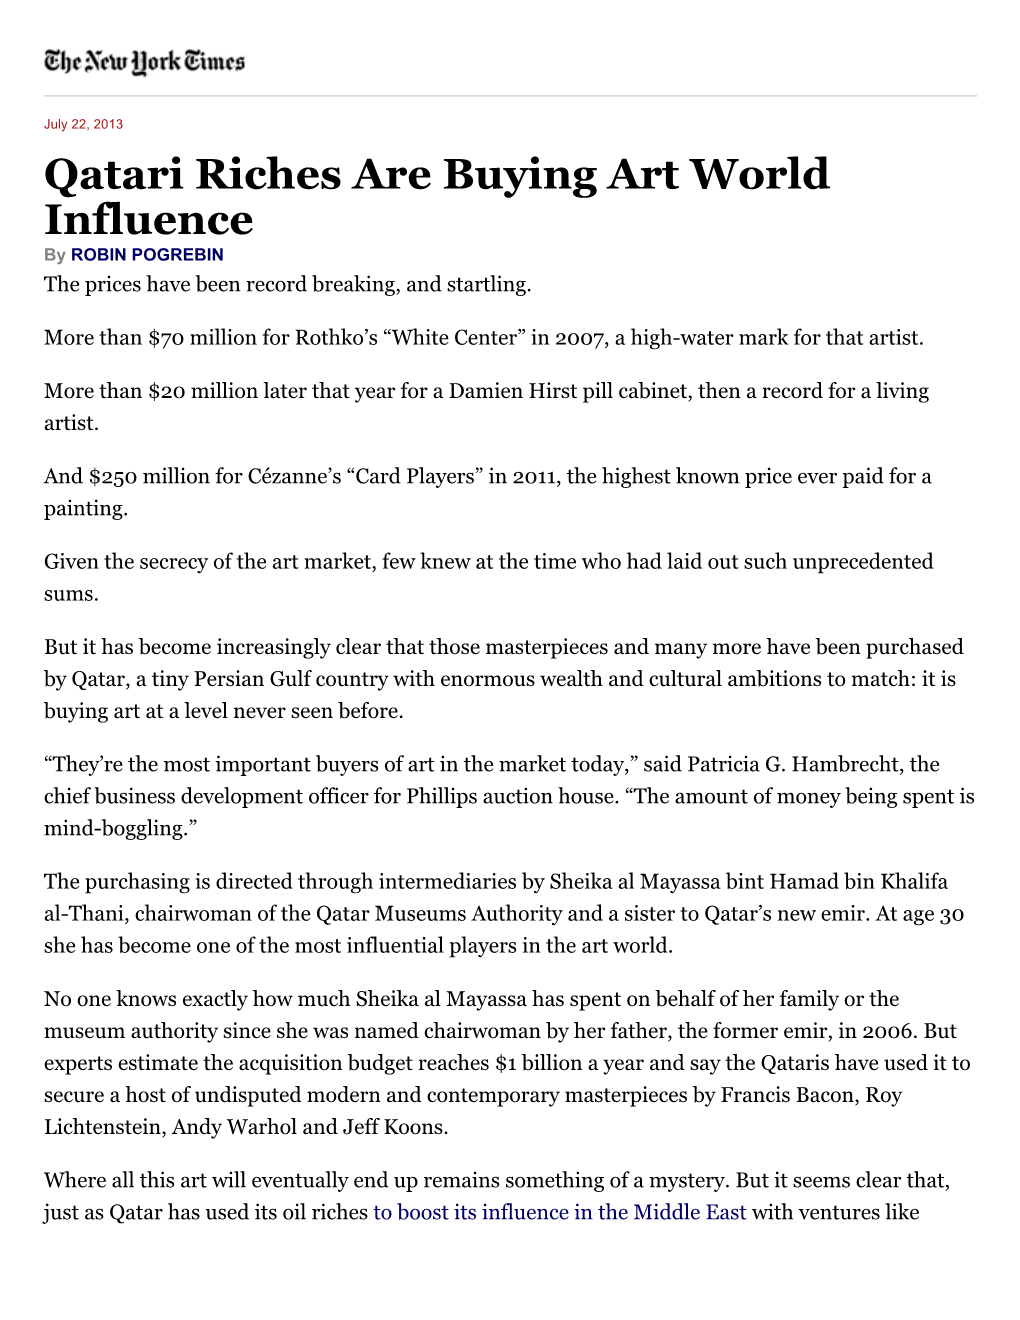 Qatari Riches Are Buying Art World Influence by ROBIN POGREBIN the Prices Have Been Record Breaking, and Startling